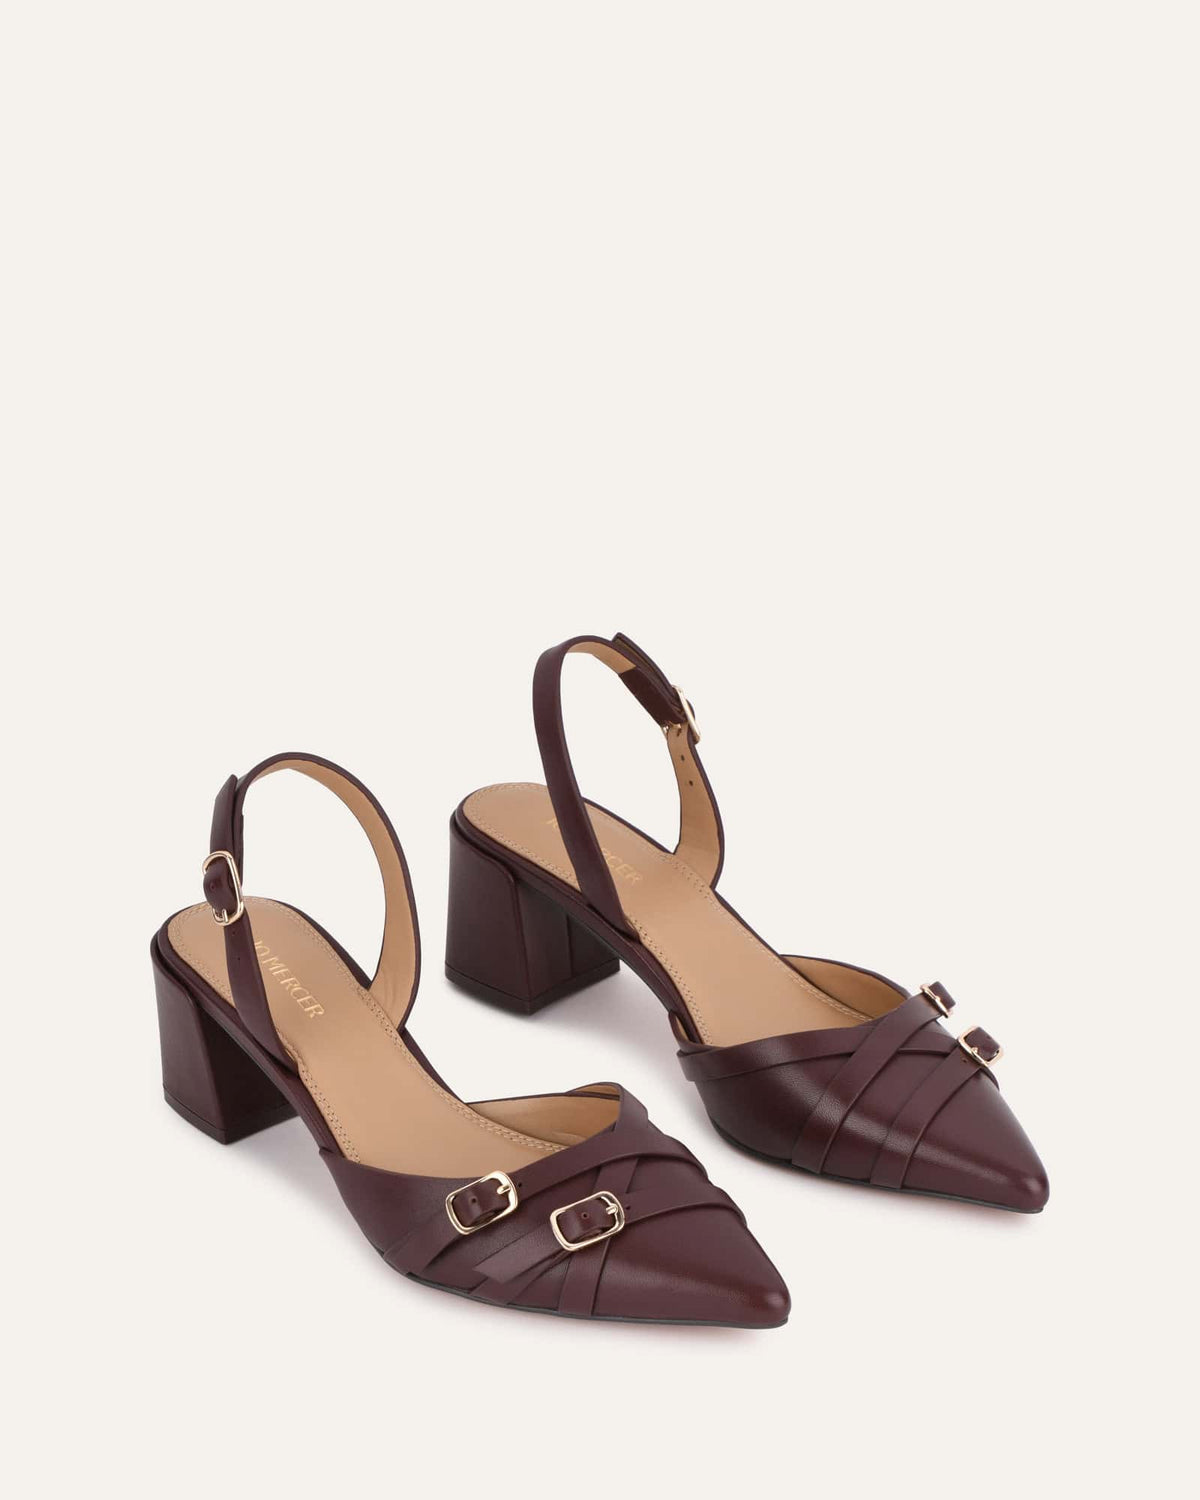 COBY LOW HEELS COCOA BROWN LEATHER